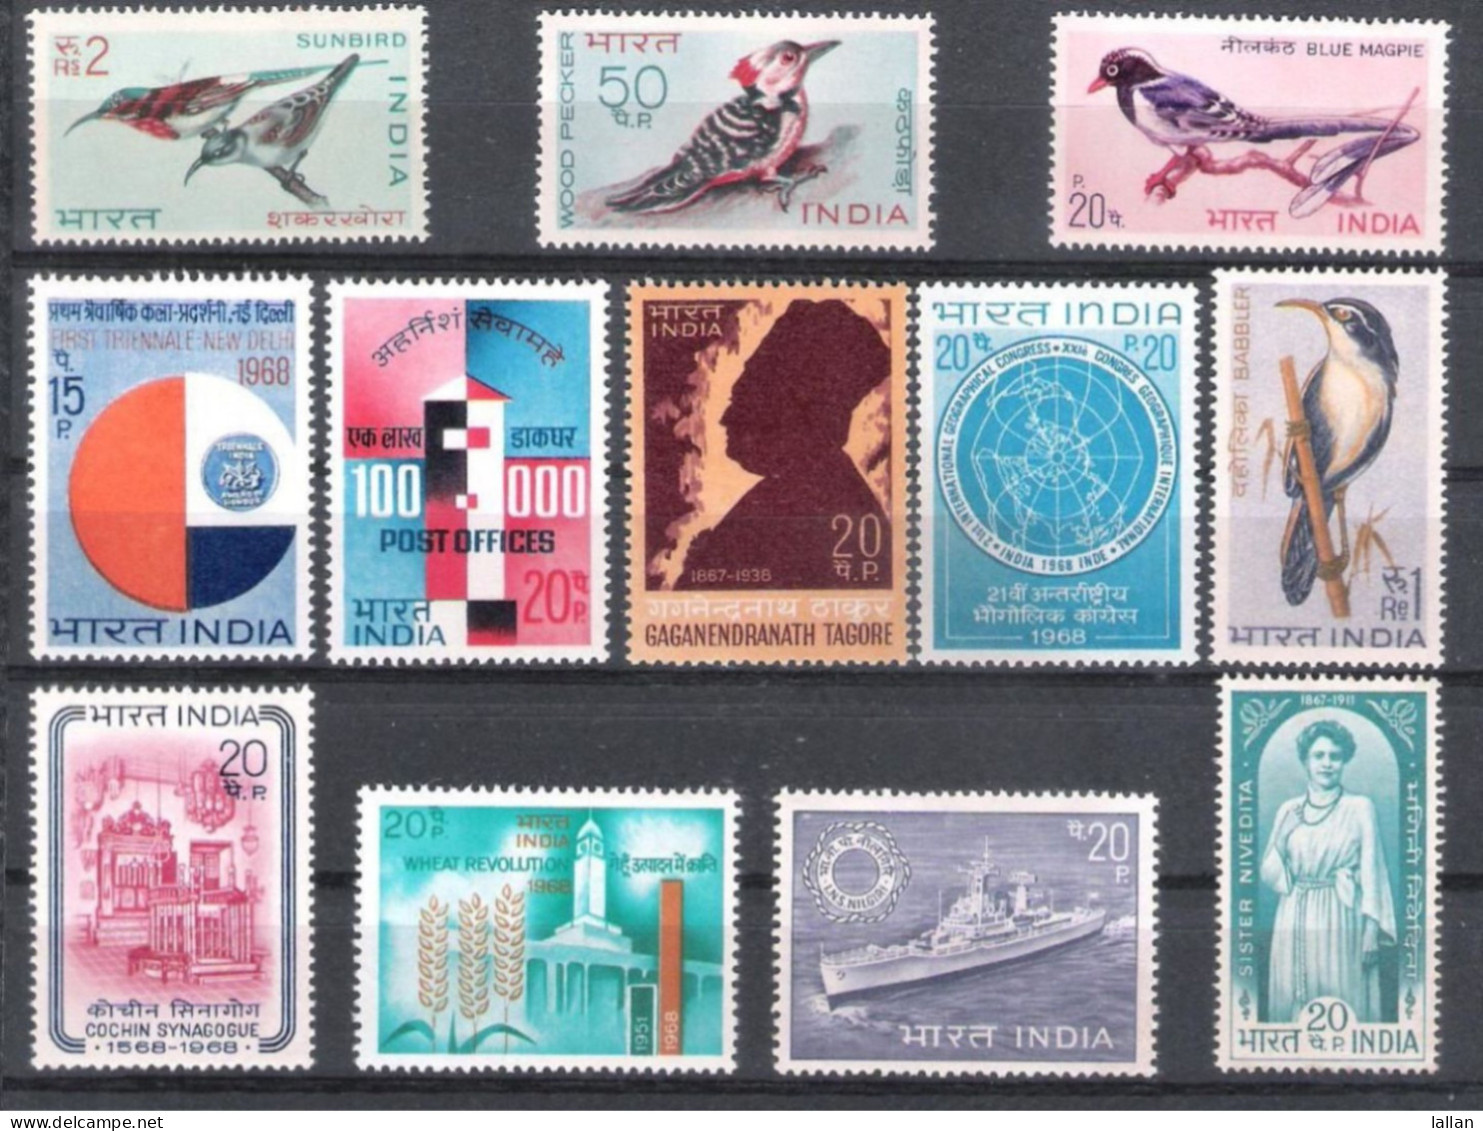 12-MNH,1968, First Bird Set, Navy, Jalianawala Bagh, Geographical Cobgress,CV-$15.00, Condition As Per ScanSGALM2 - Unused Stamps